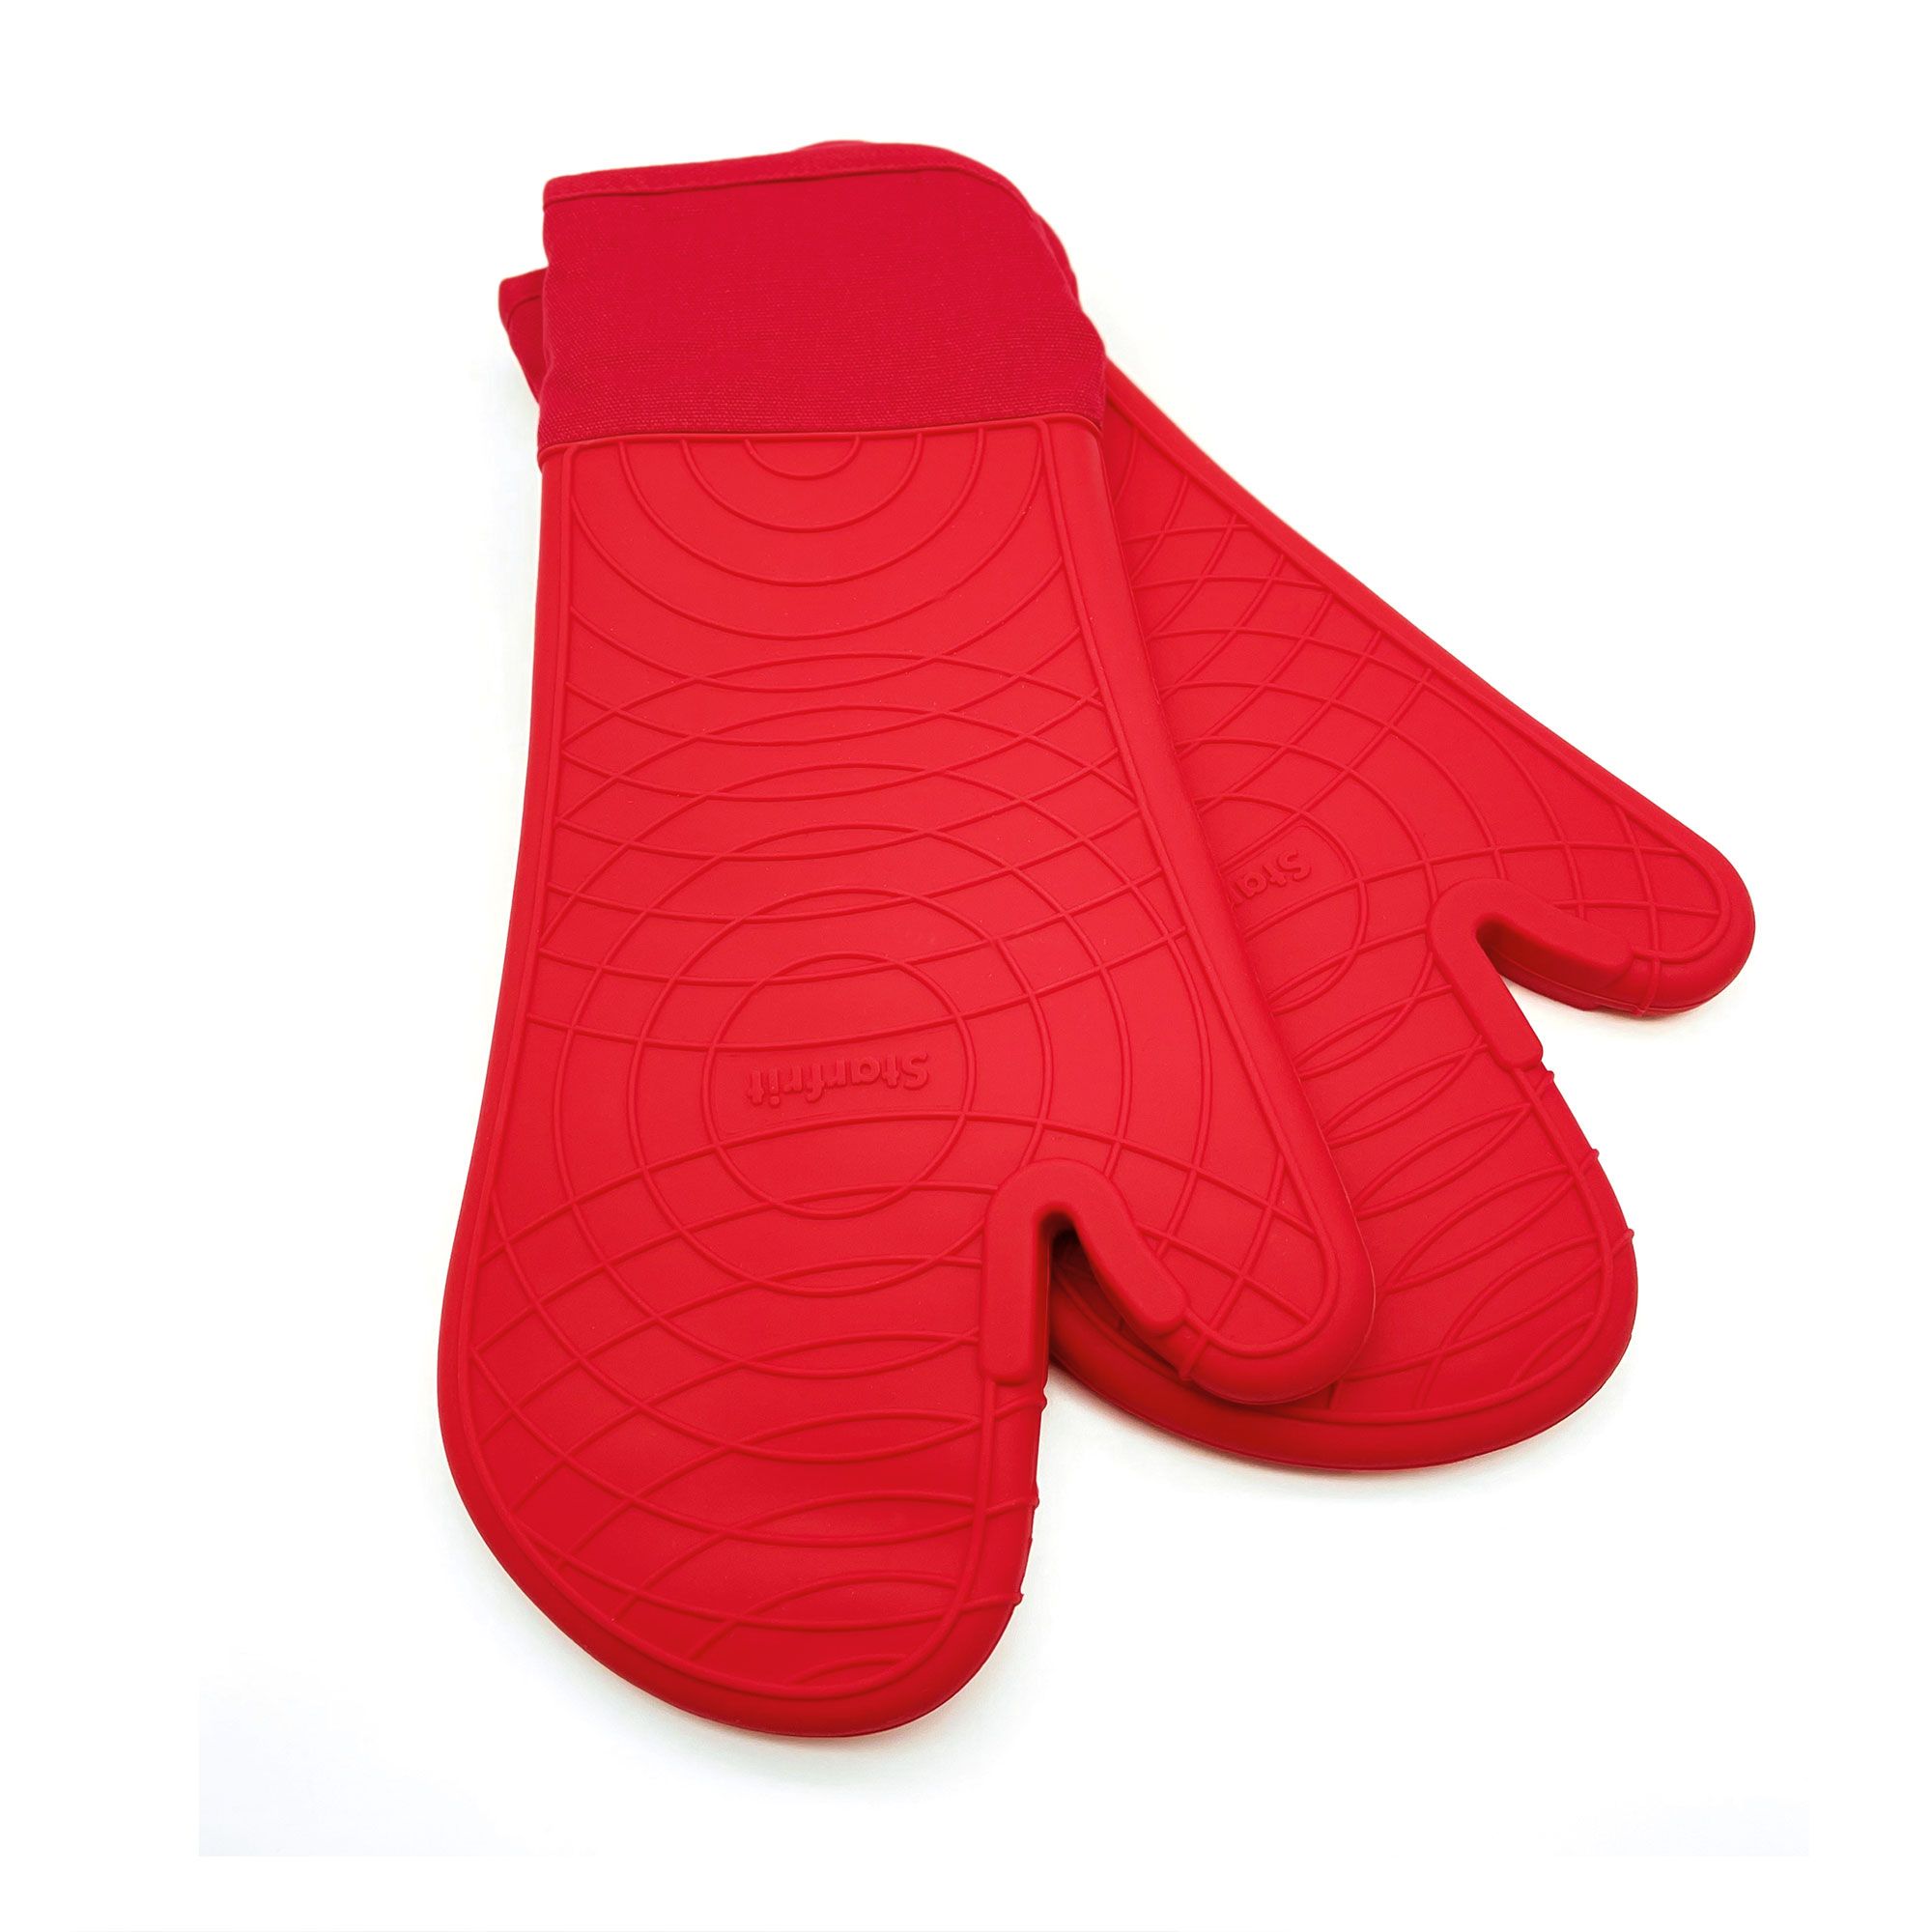 Zulay Kitchen Silicone Oven Mitts - Red, 2 - Harris Teeter